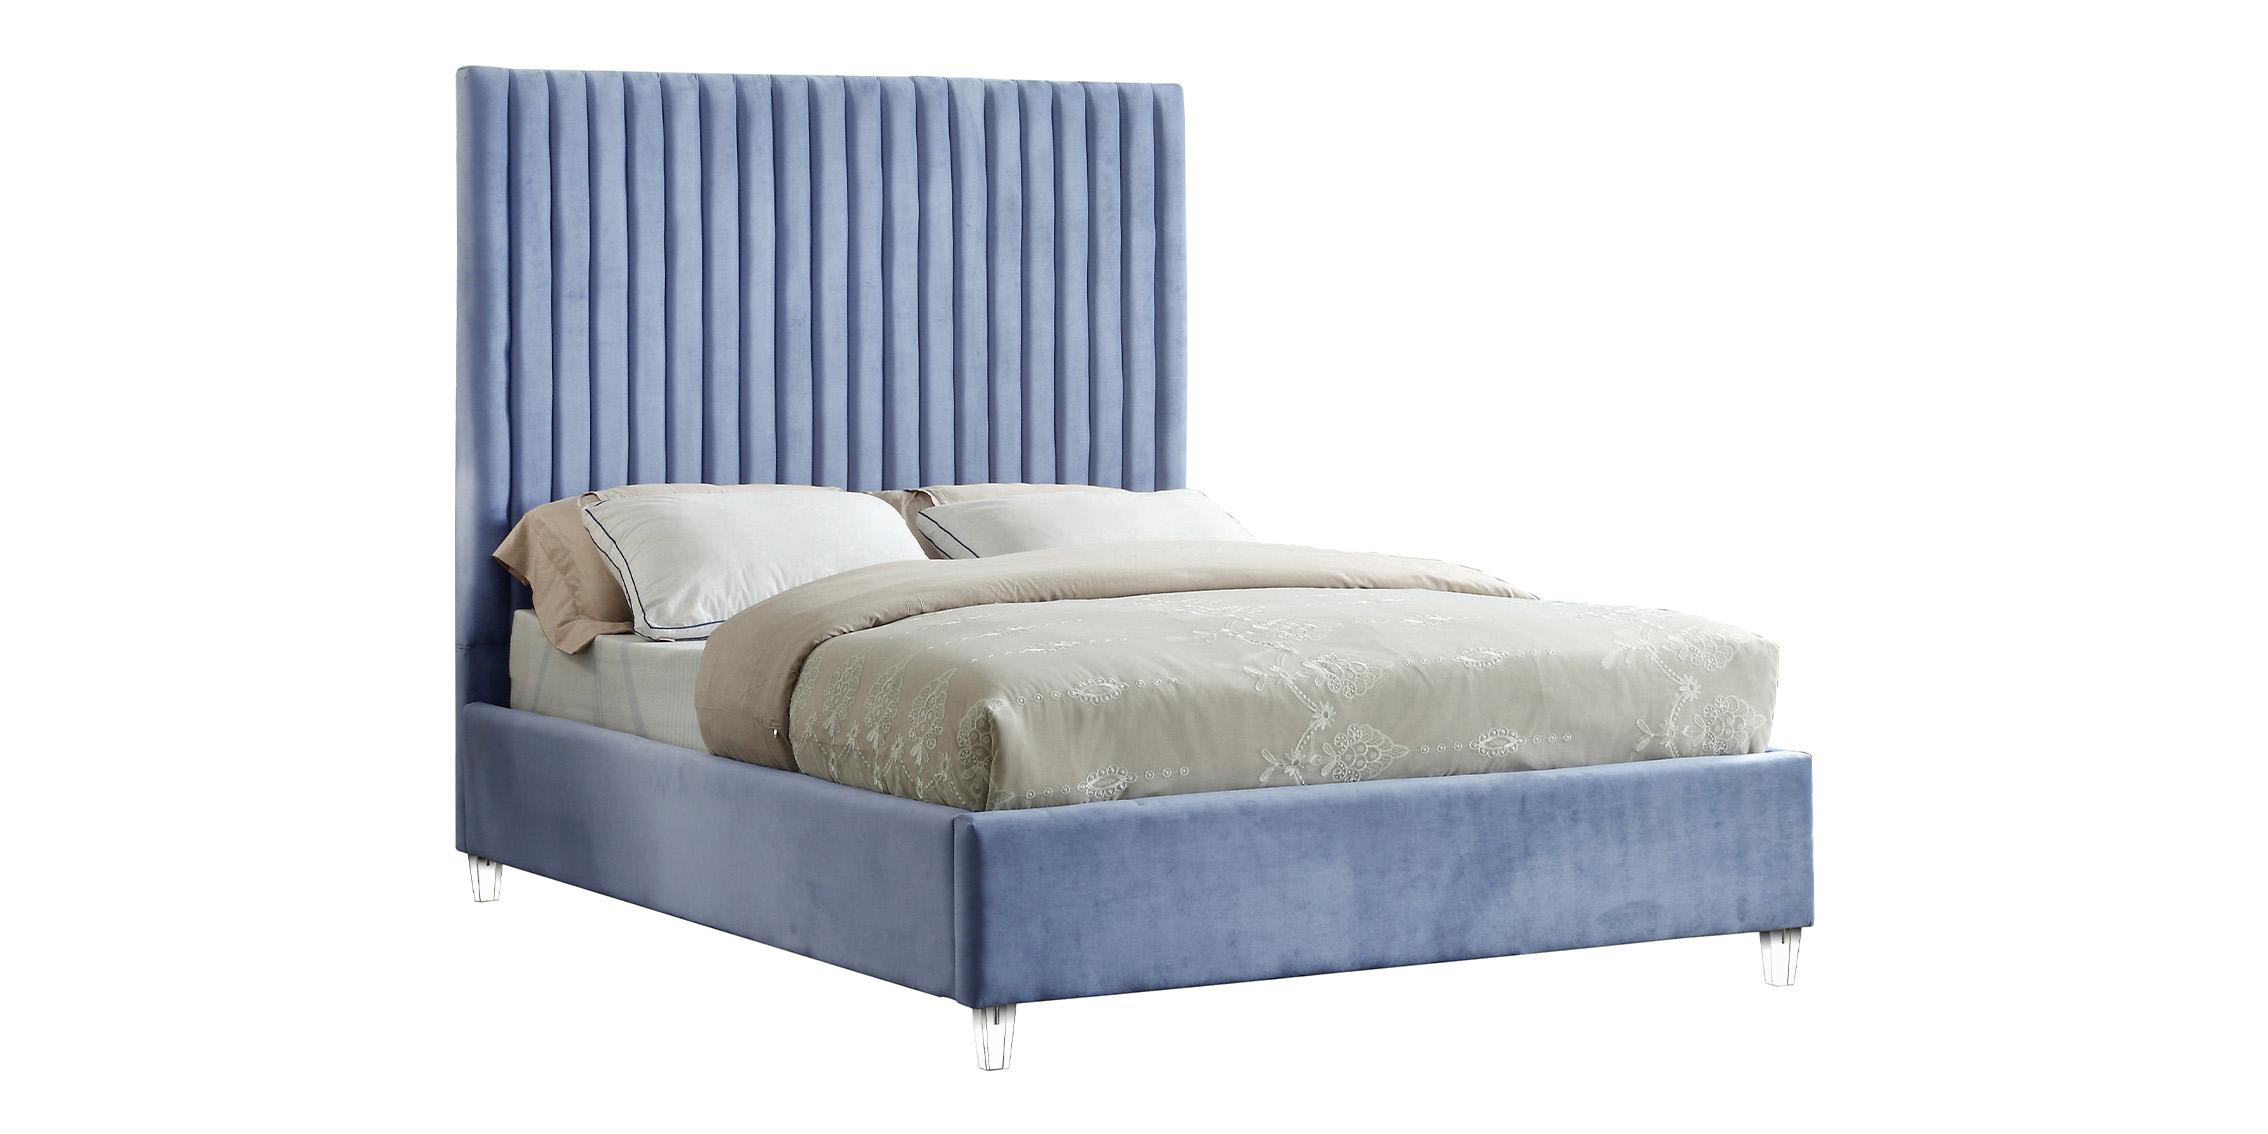 

    
Sky Blue Velvet Channel Tufted Platform Full Bed Candace Meridian Contemporary
